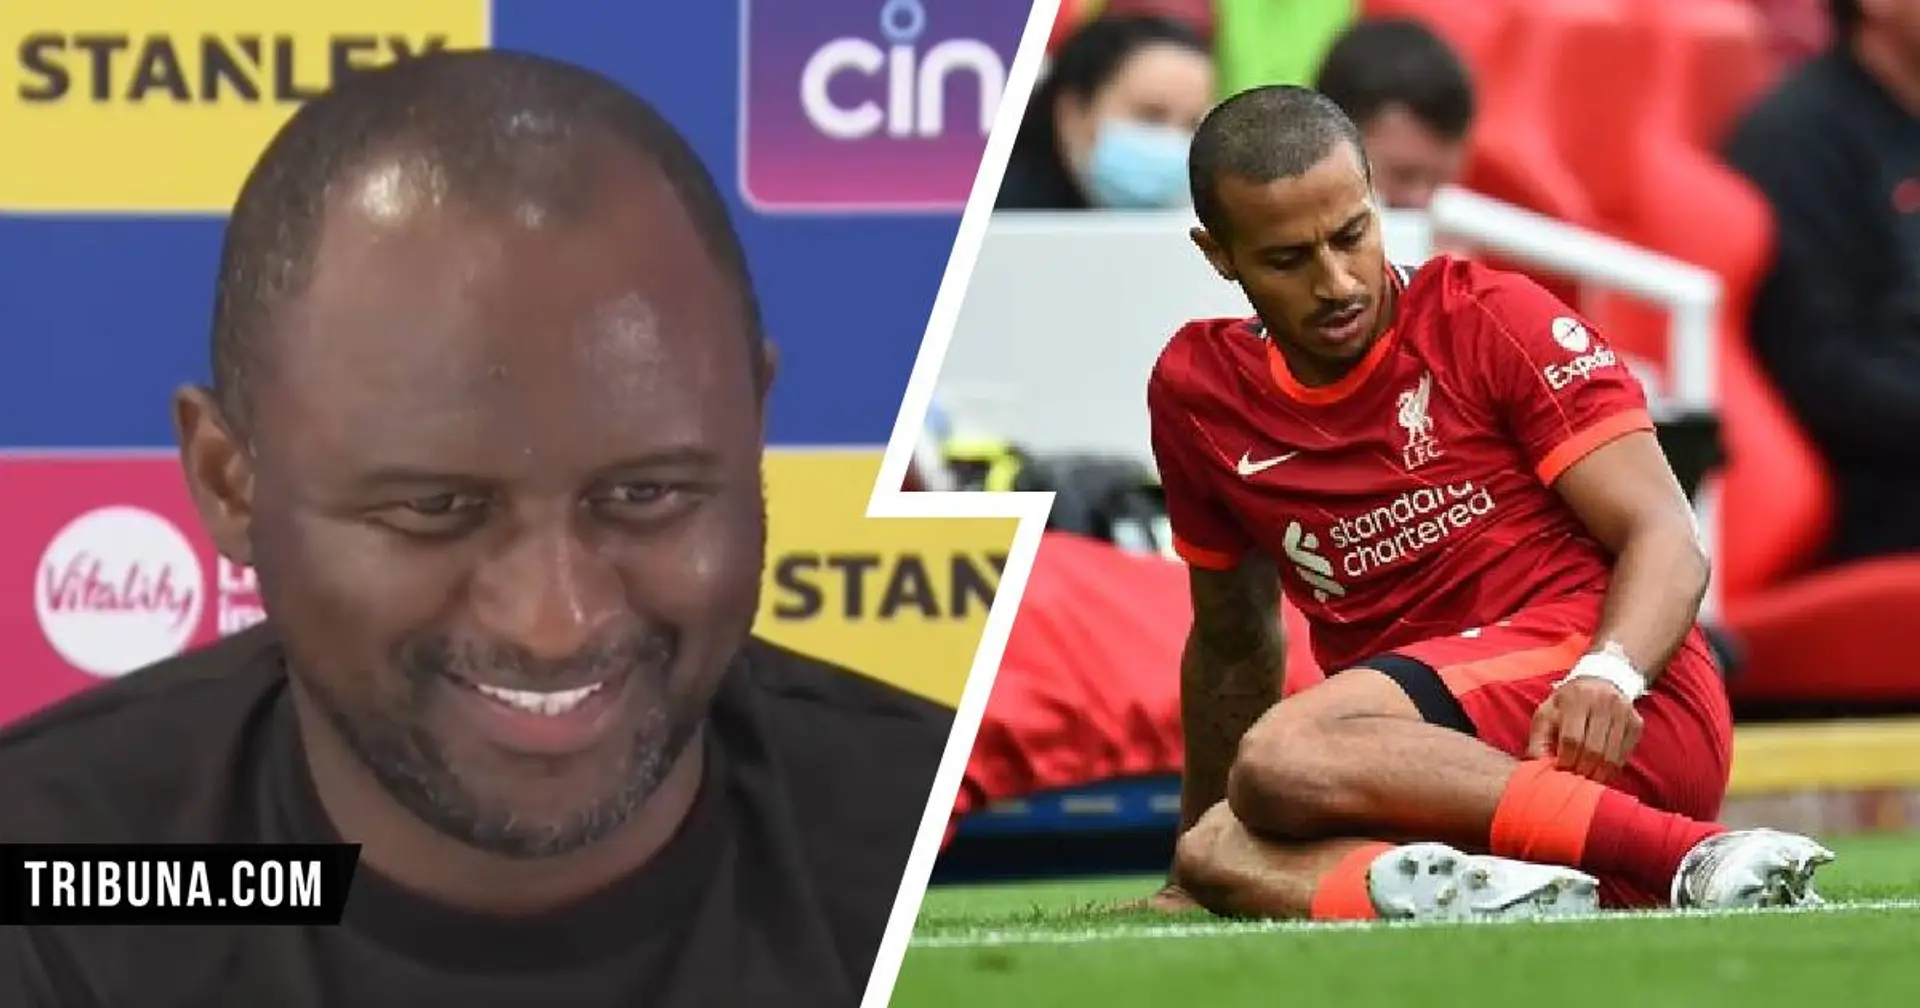 Palace manager Vieira on Liverpool's injury issues: 'I'm sure that they can cope with a couple players missing!' 